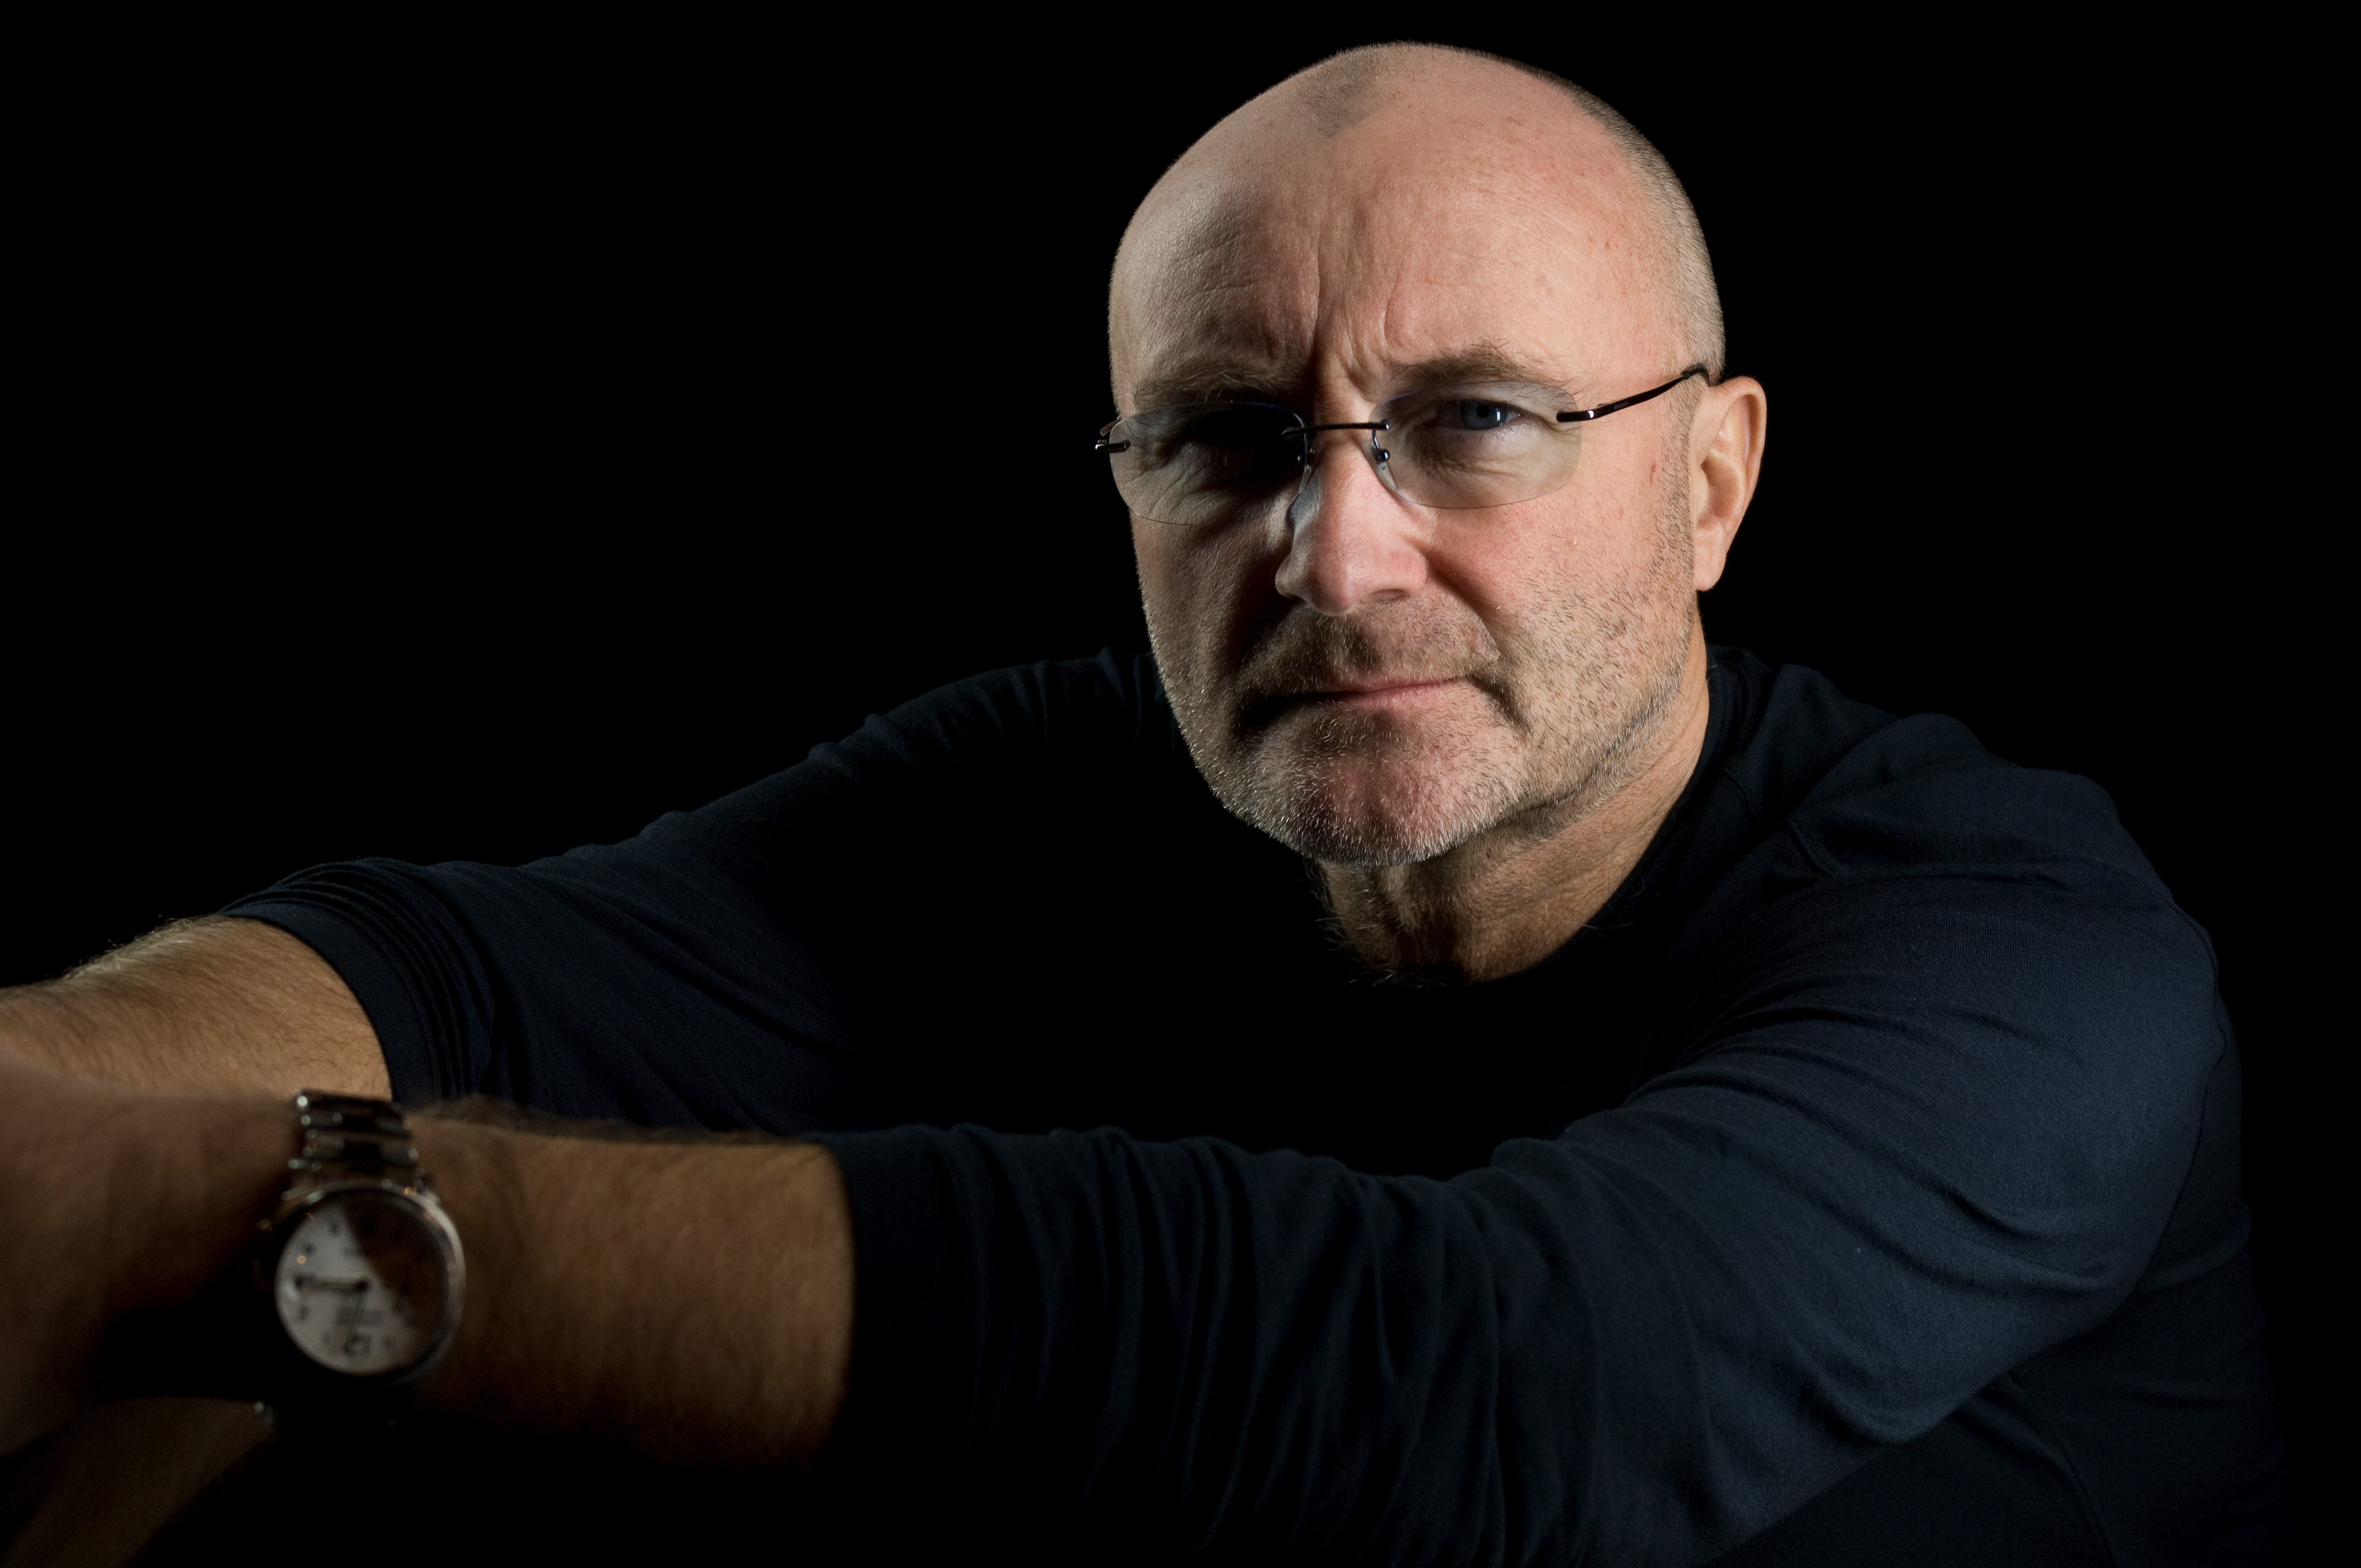 Musician Phil Collins poses for a photo